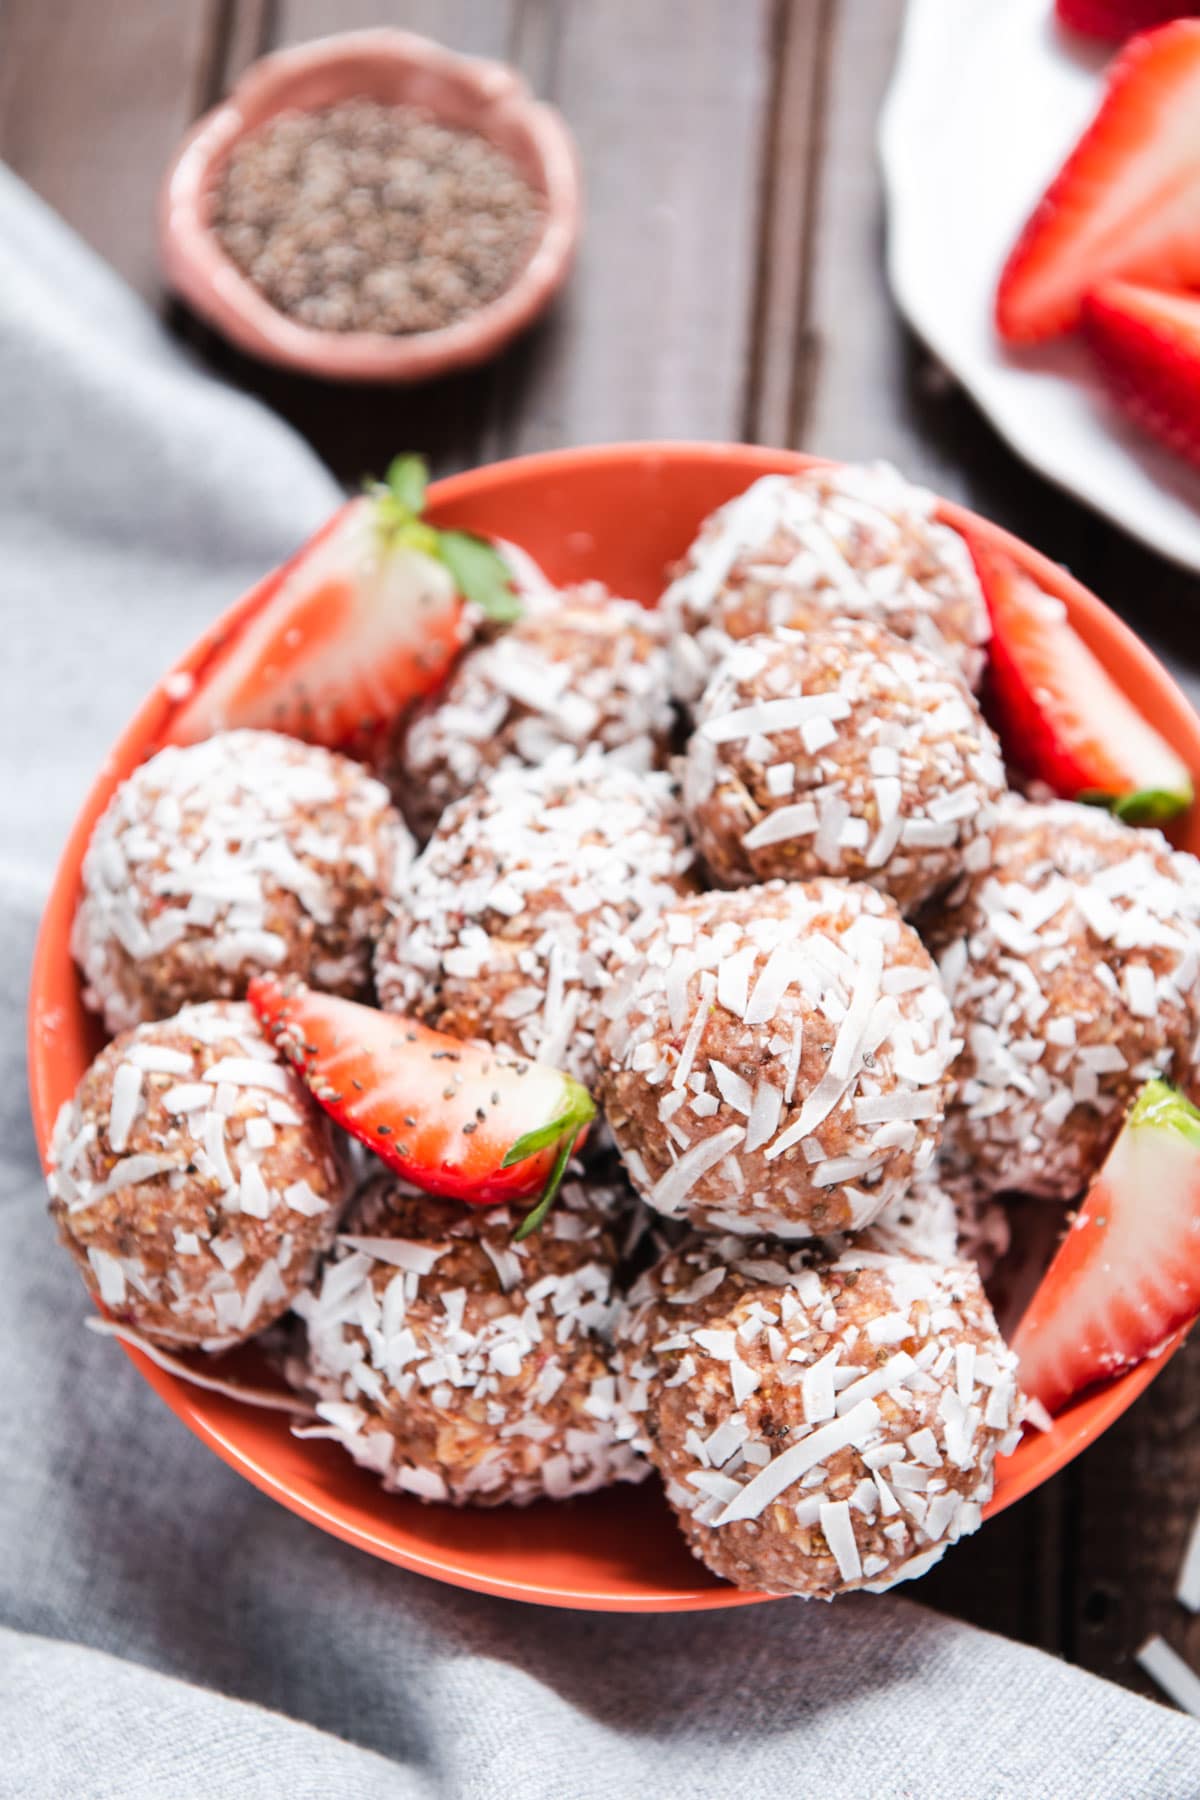 Coconut coated strawberry balls in a pink bowl with strawberry slices.